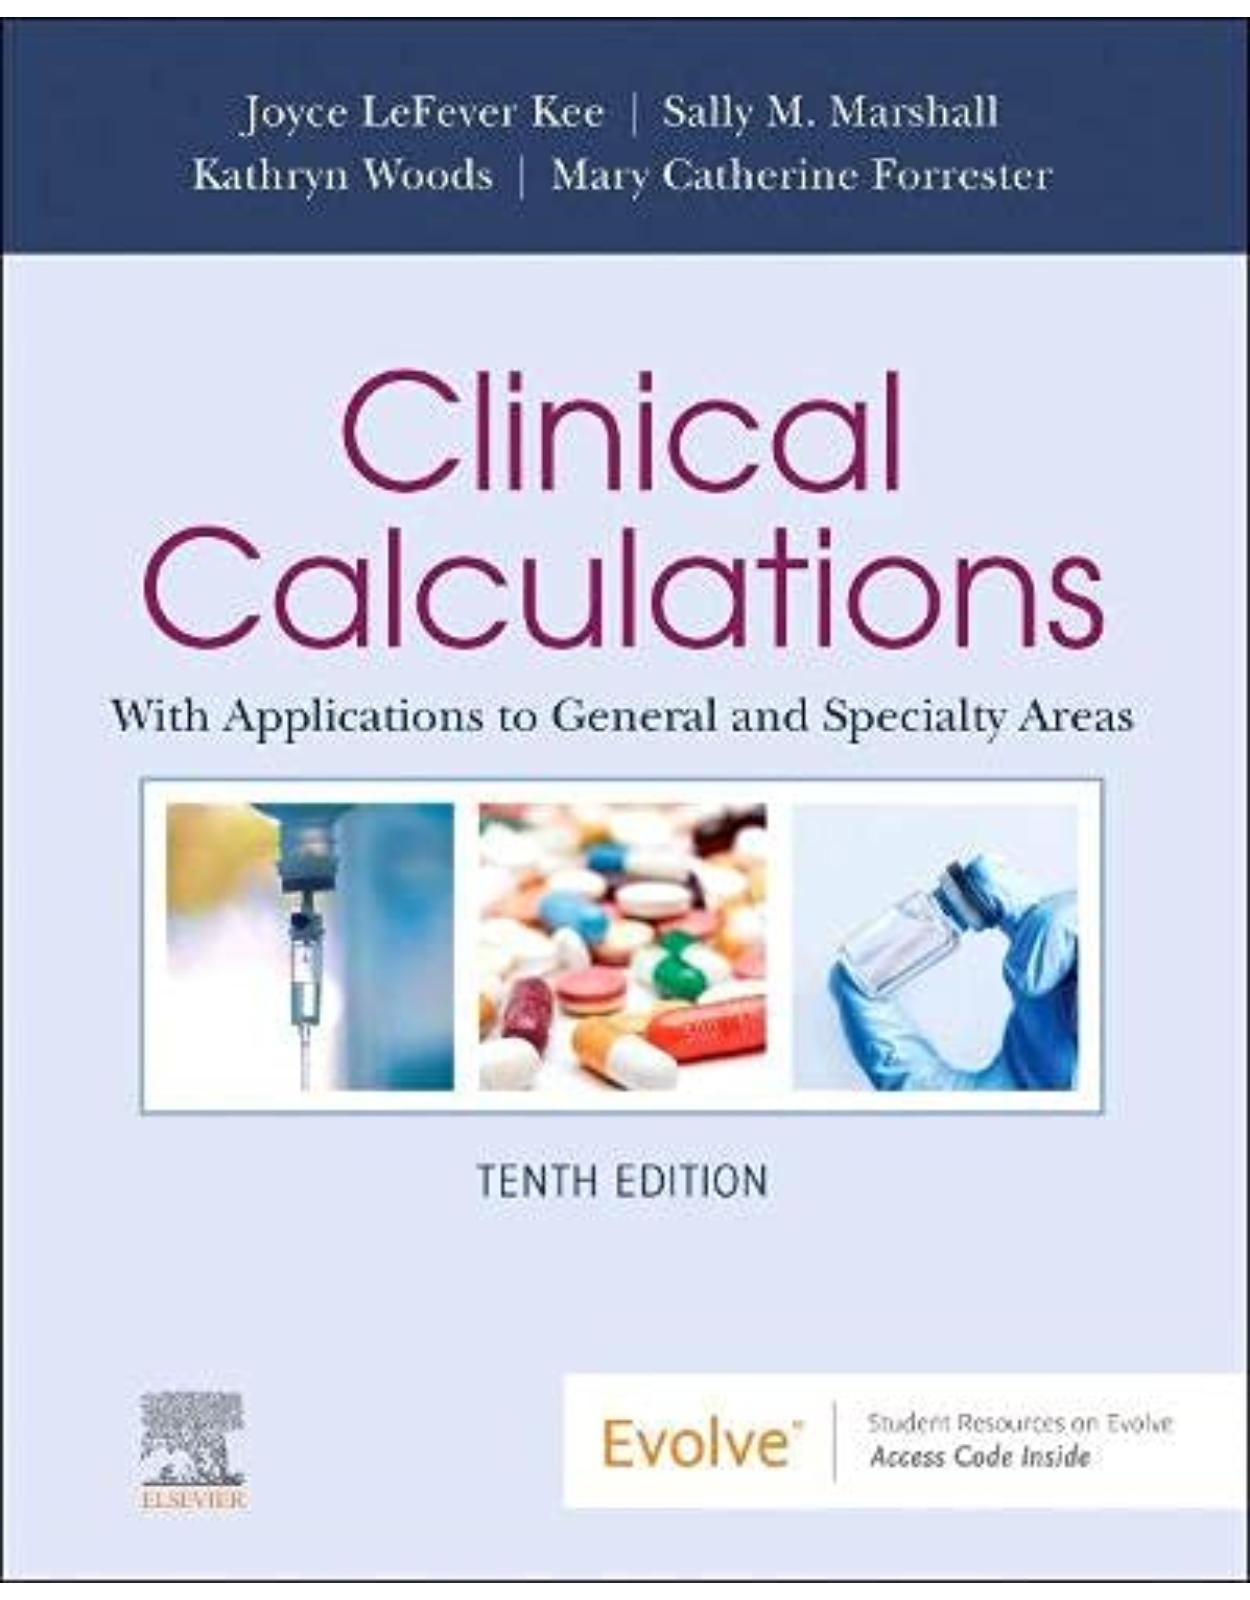 Clinical Calculations: With Applications to General and Specialty Areas 